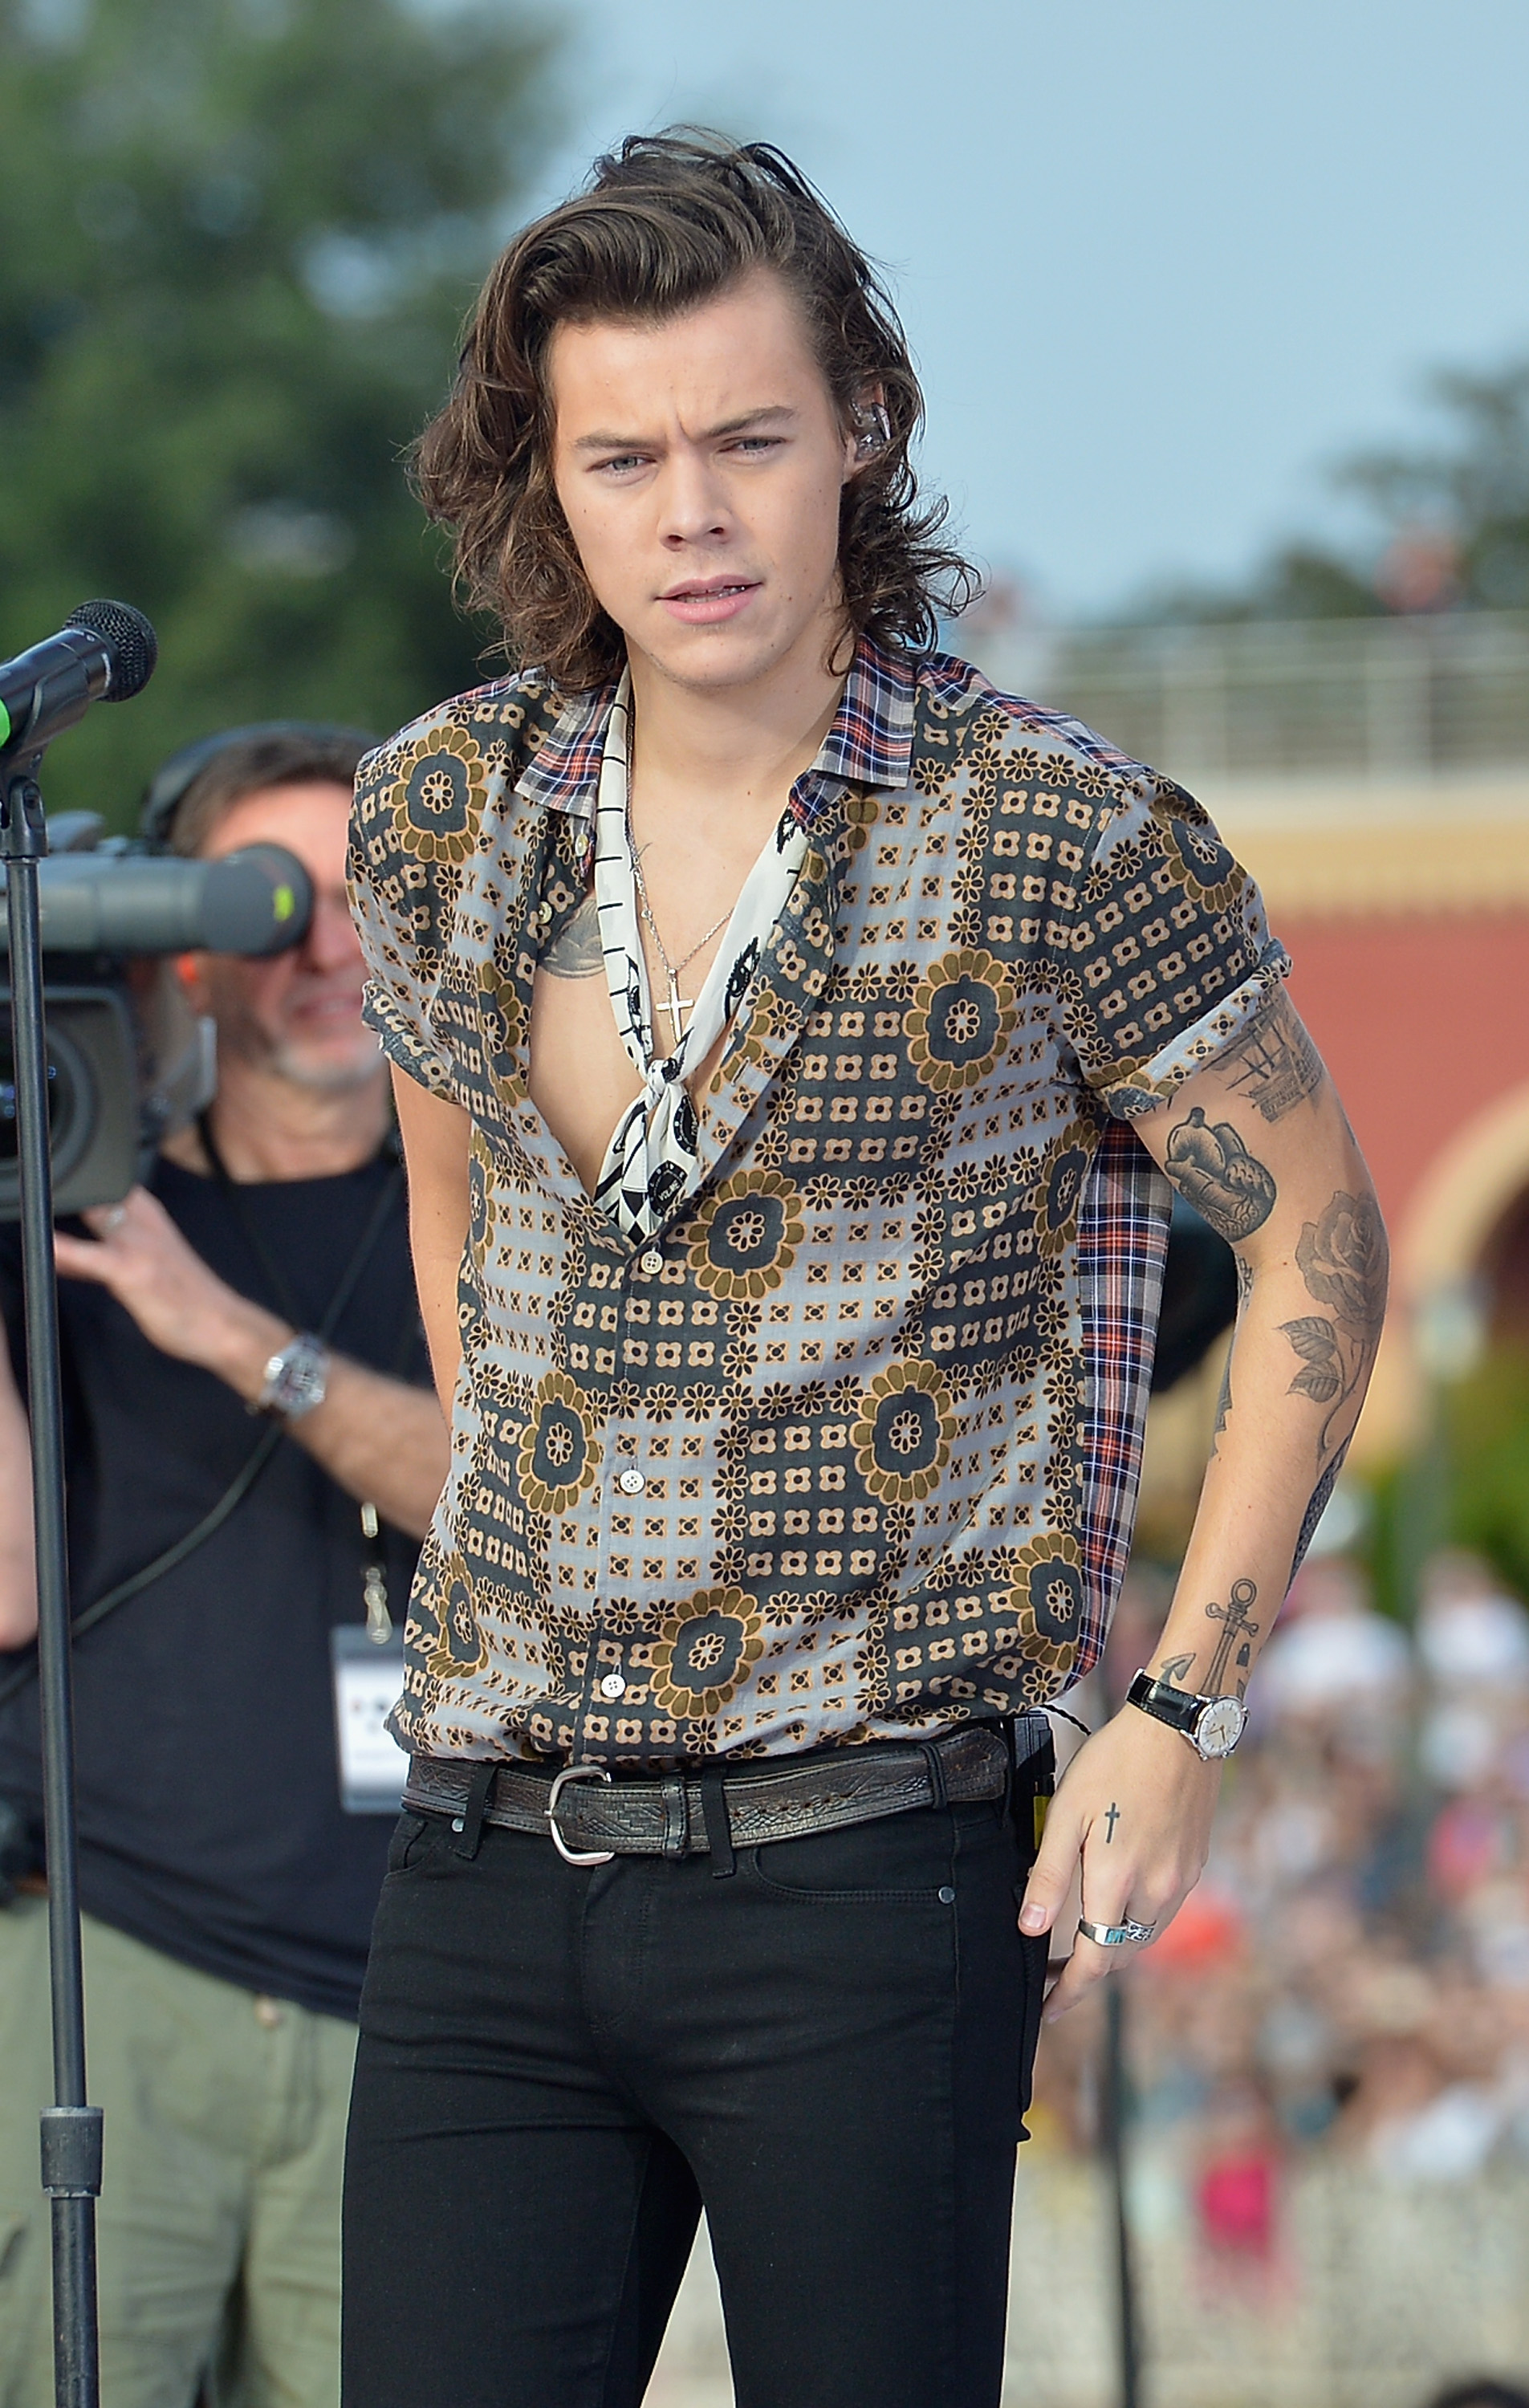 Harry Styles wearing a paisley shirt on the NBC Today show for the launch of the One Direction album Four